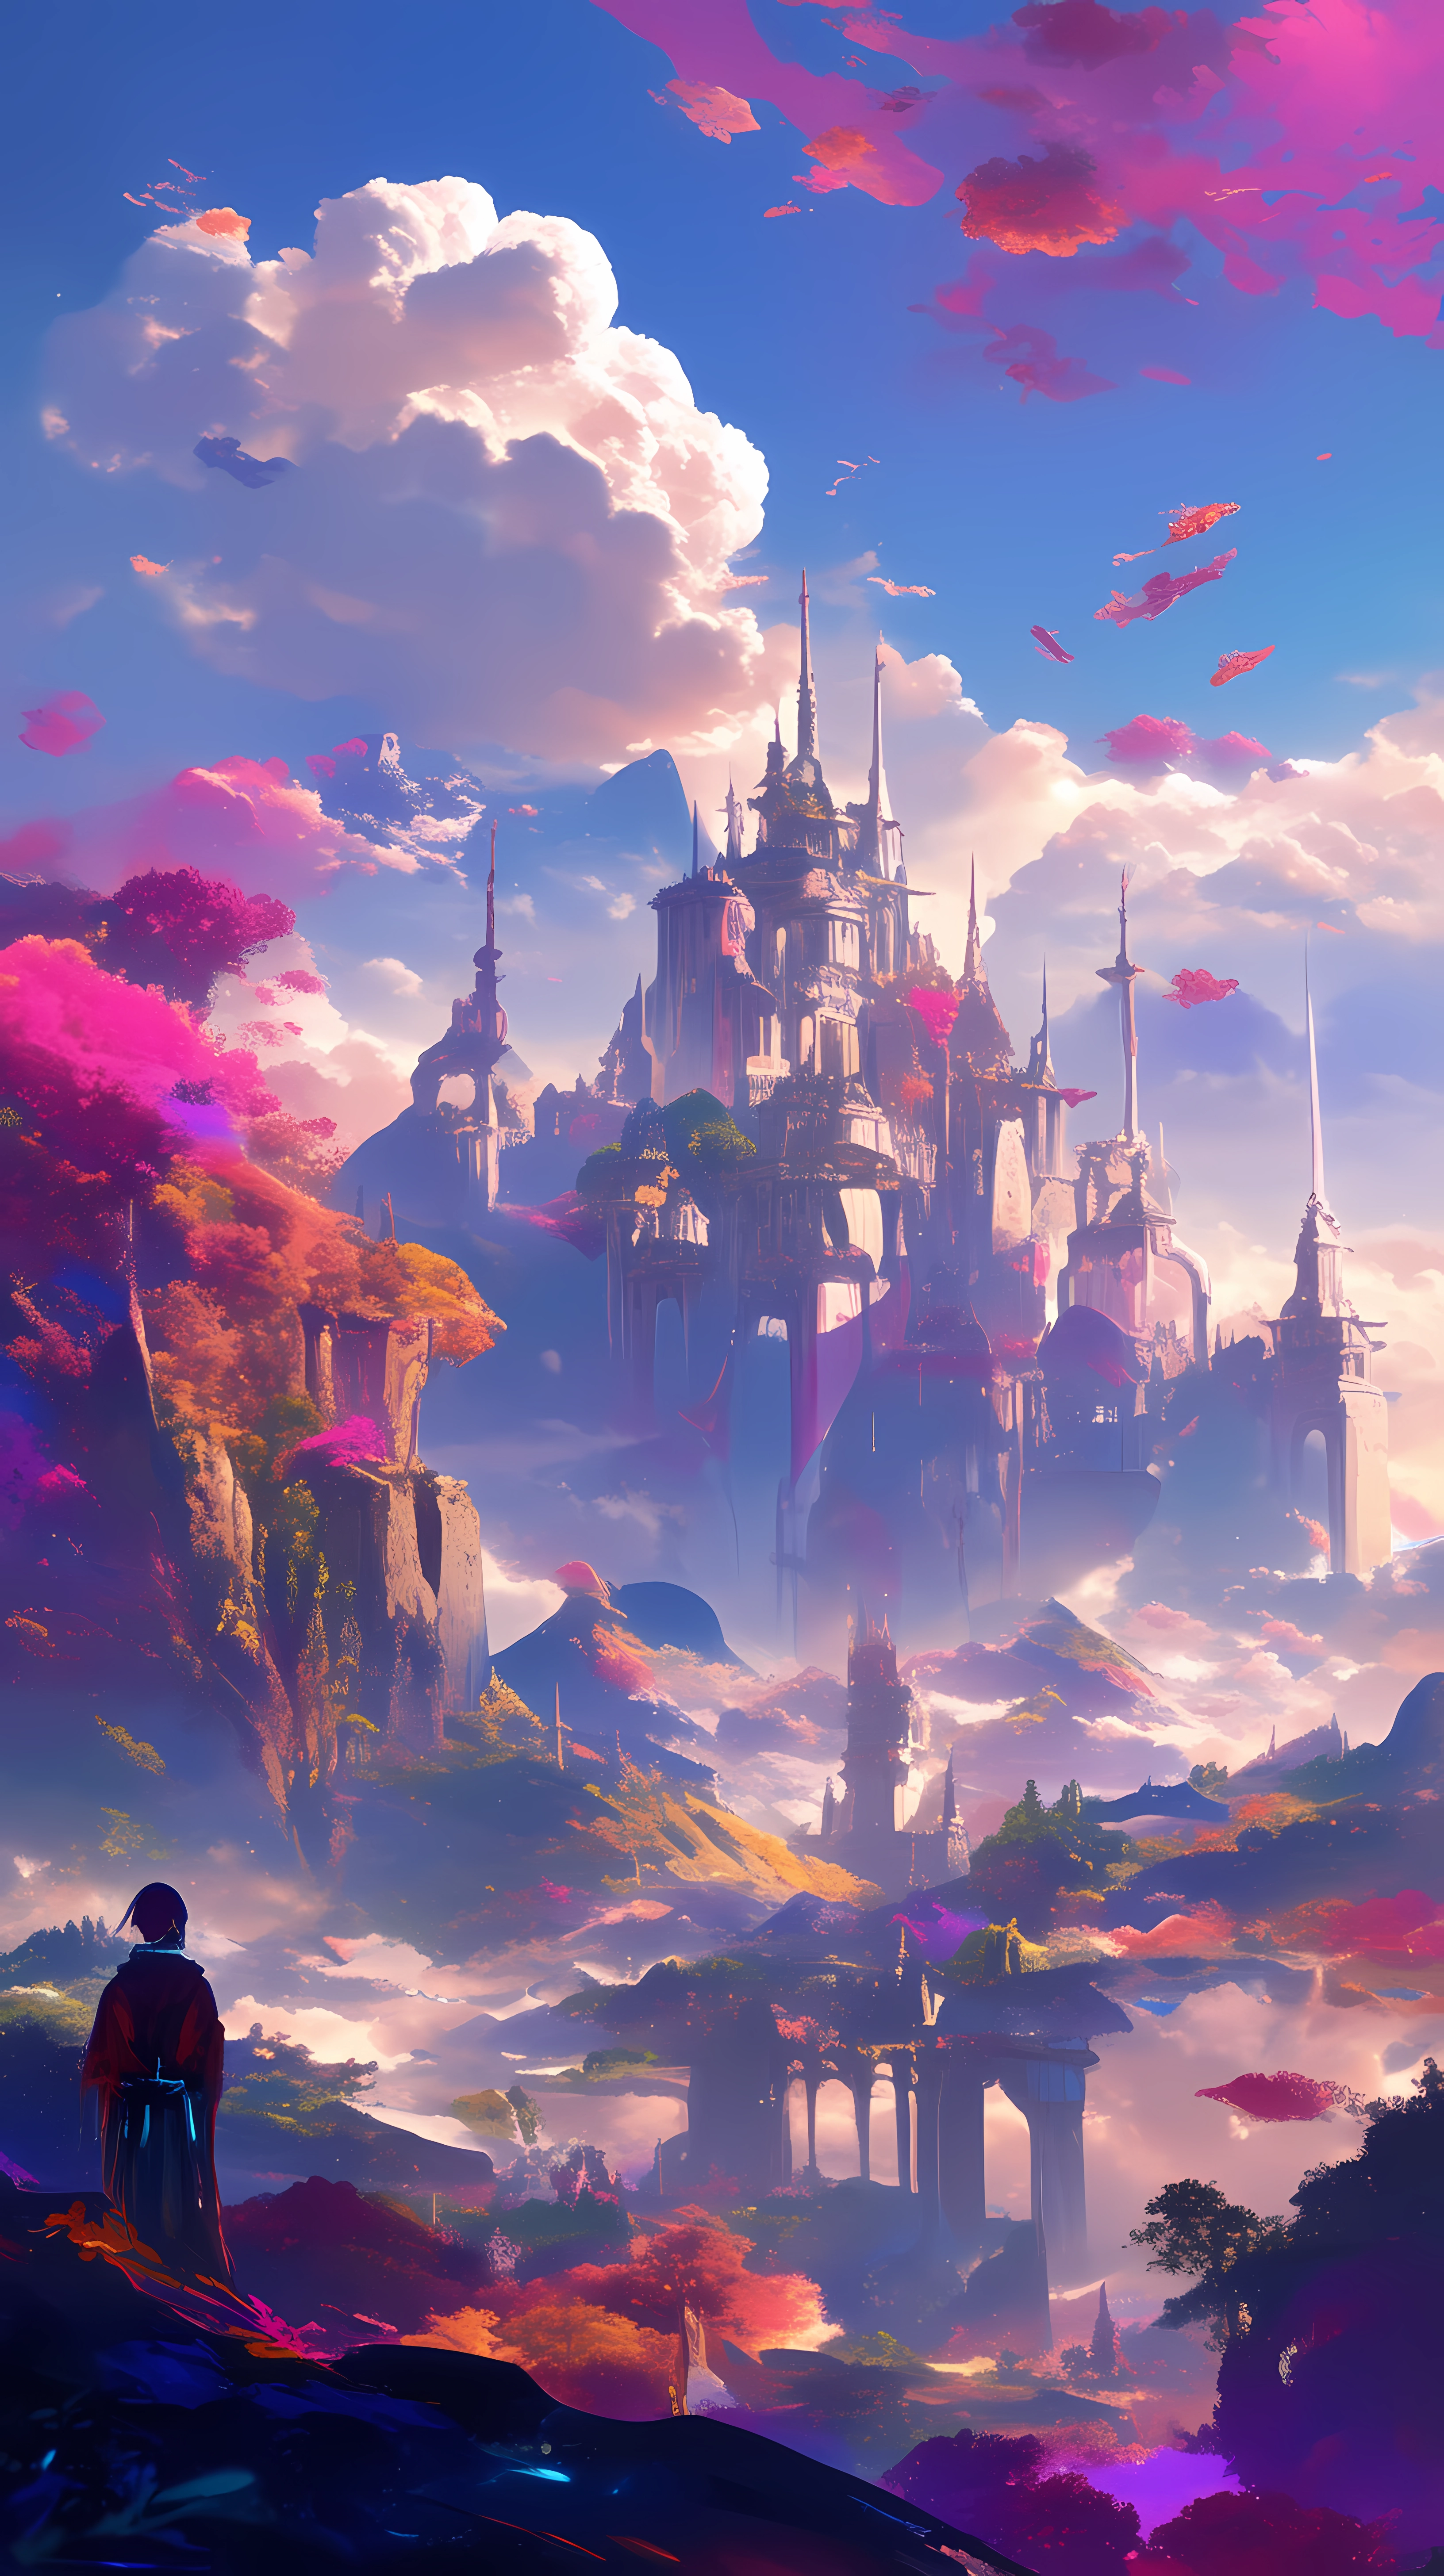 Anime Fantasy City, Castle, Village, Waterfall, Witch - Fantasy City  (#1906113) - HD Wallpaper & Backgrounds Download